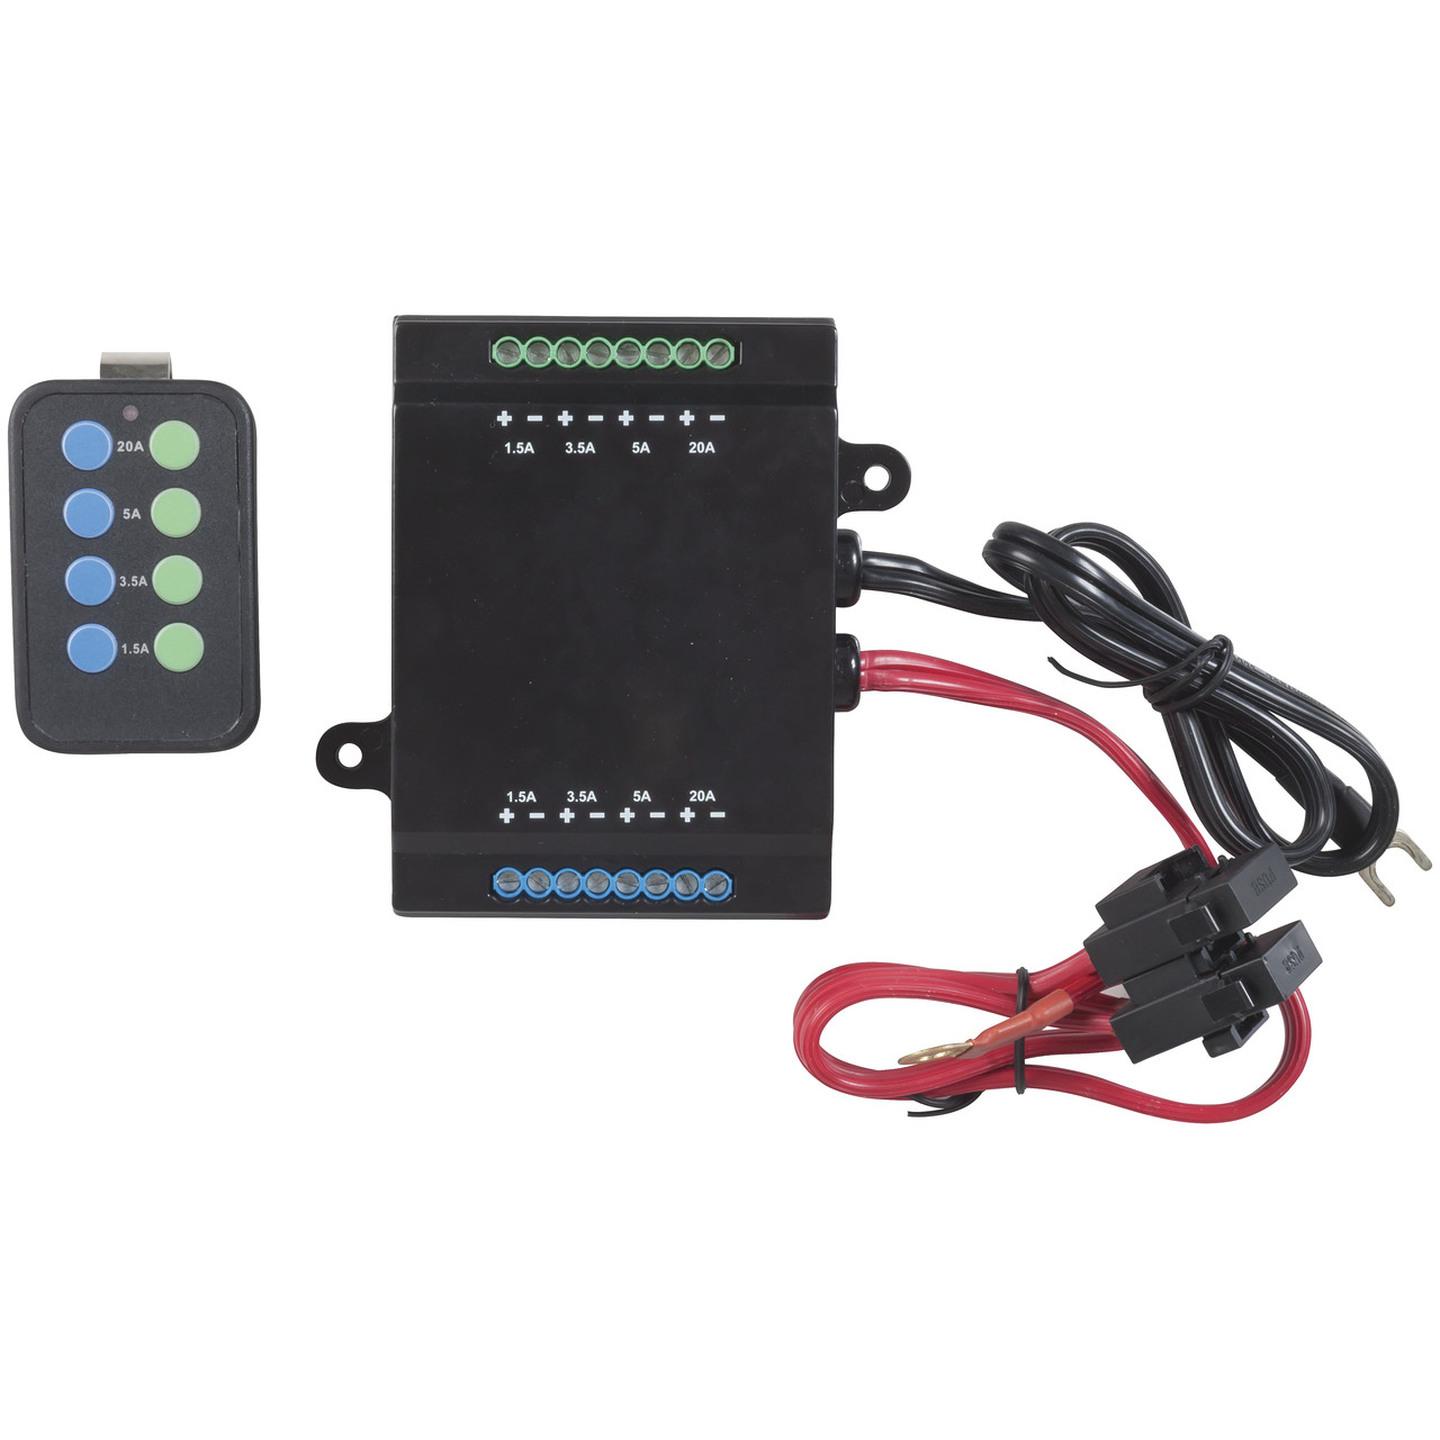 8-Channel Wireless Light Controller for Vehicles